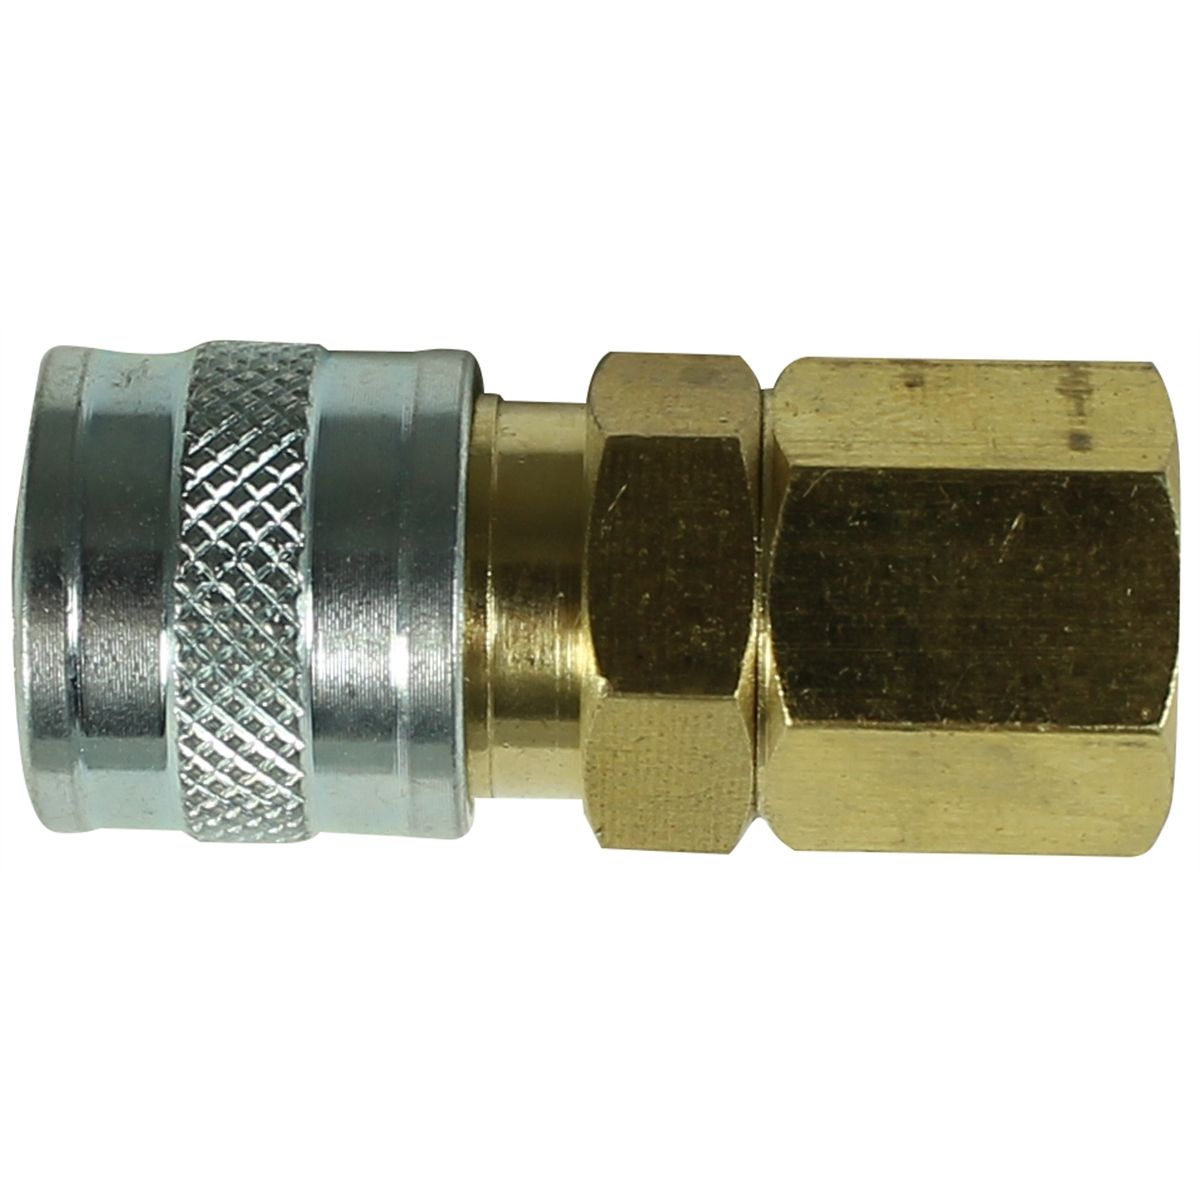 Replacement Quick Connect Coupler for TU-471A